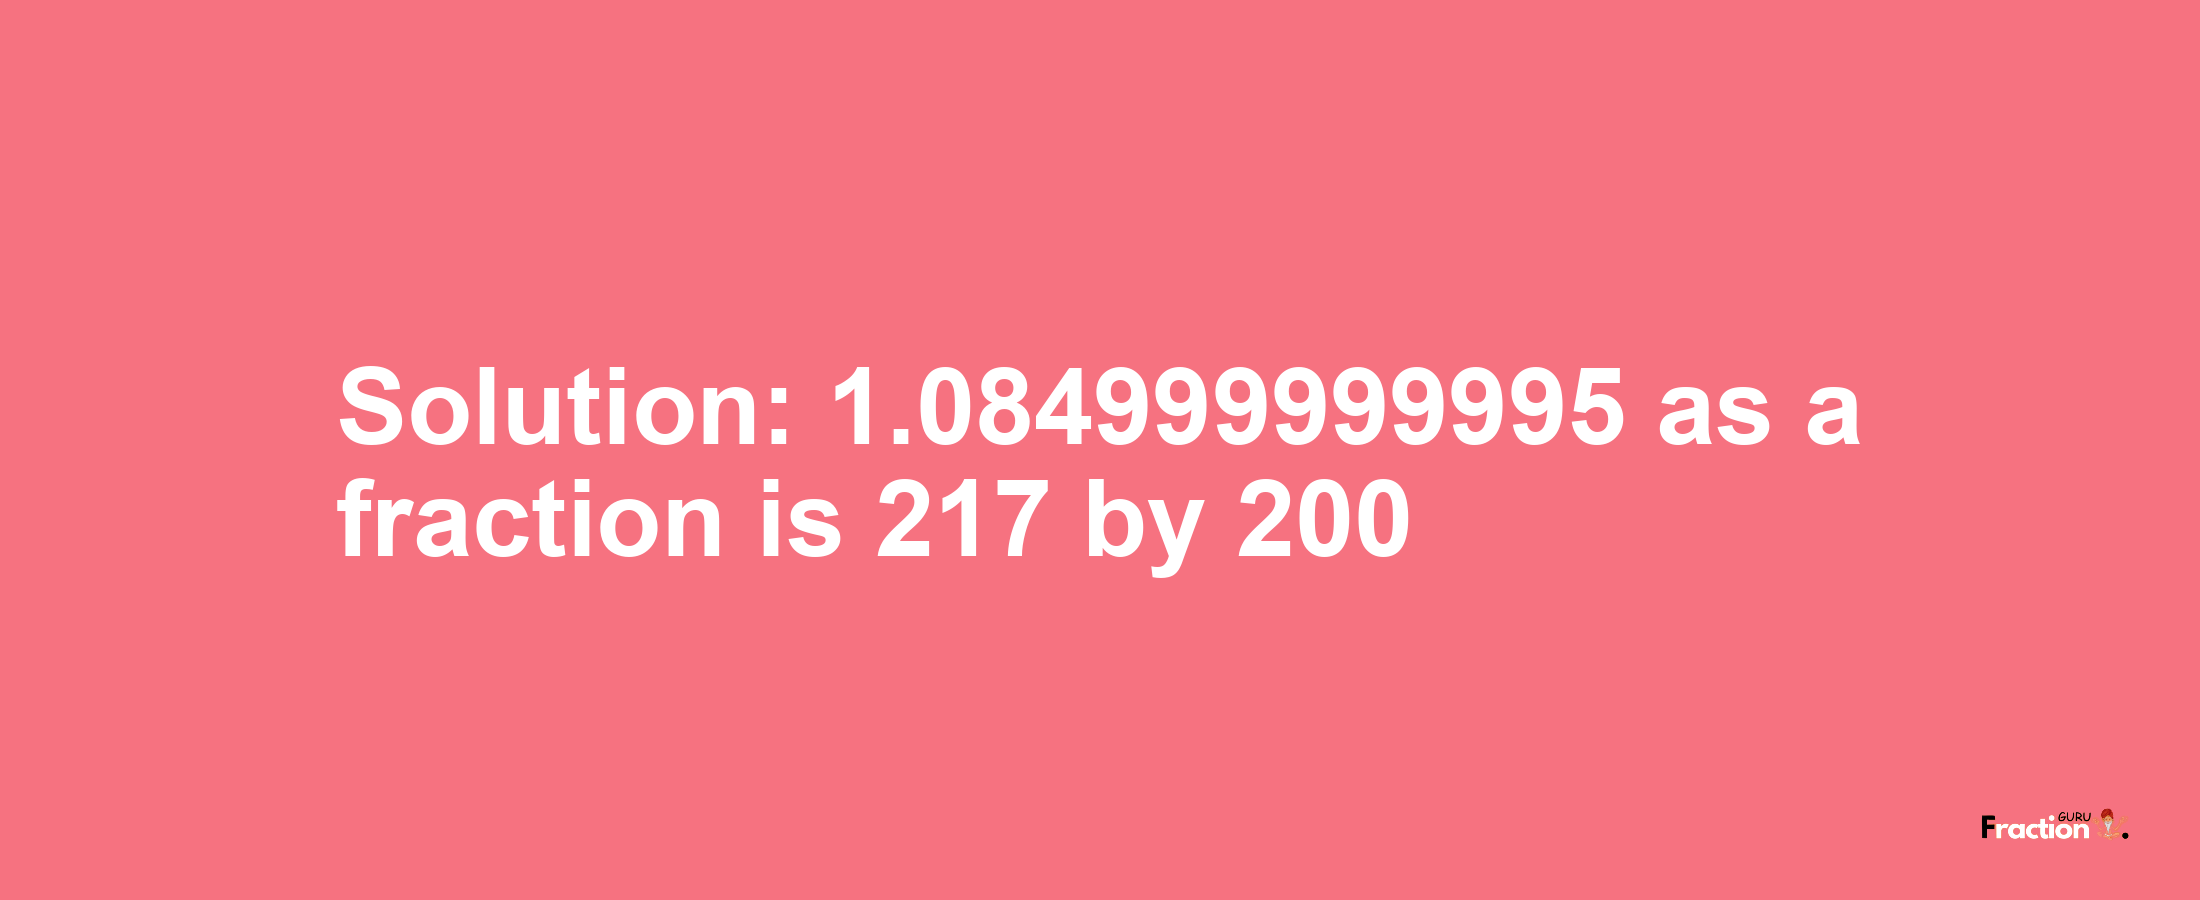 Solution:1.084999999995 as a fraction is 217/200